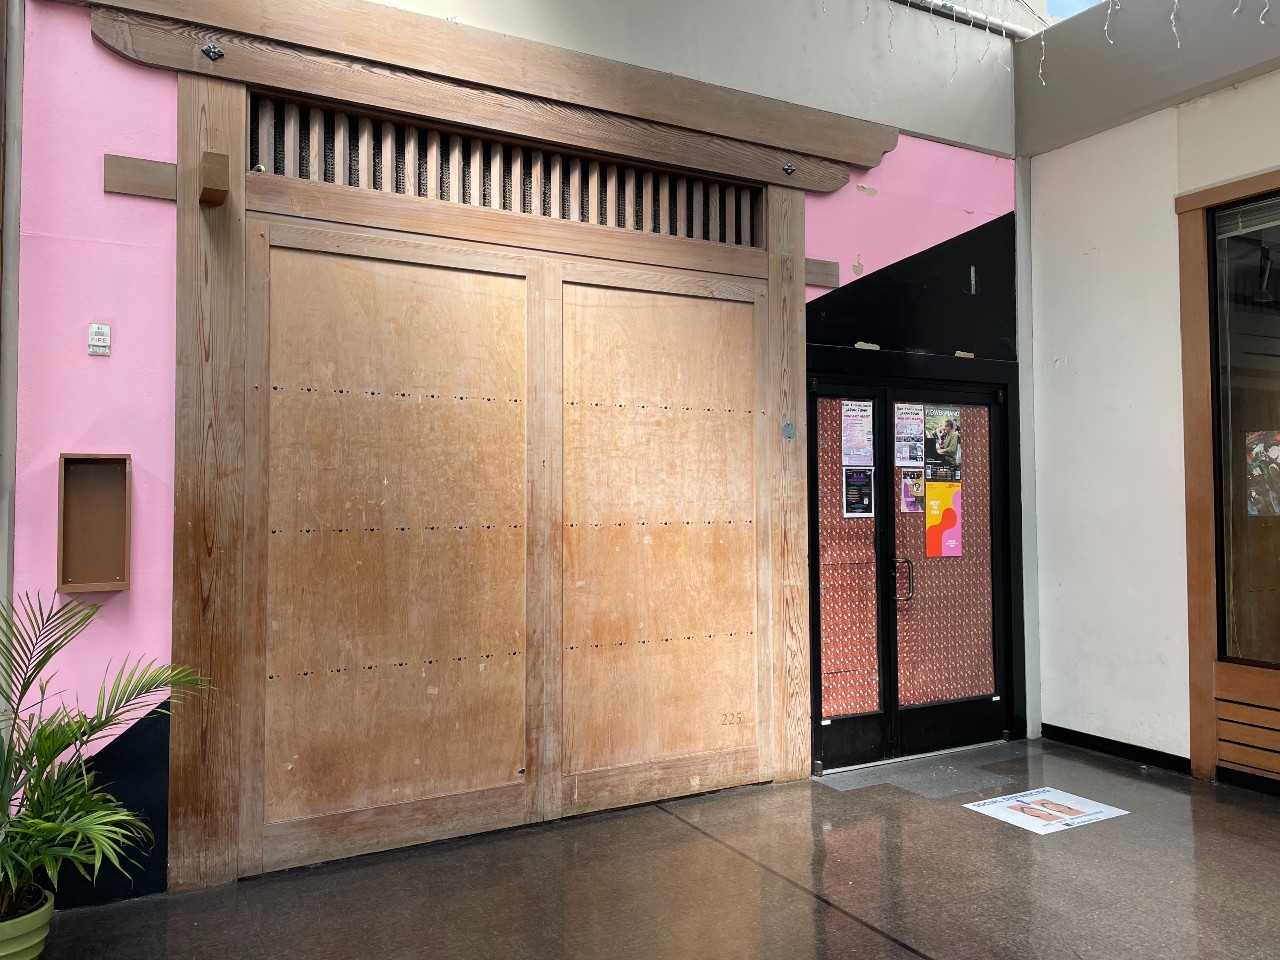 A store is boarded up with a large wooden door.